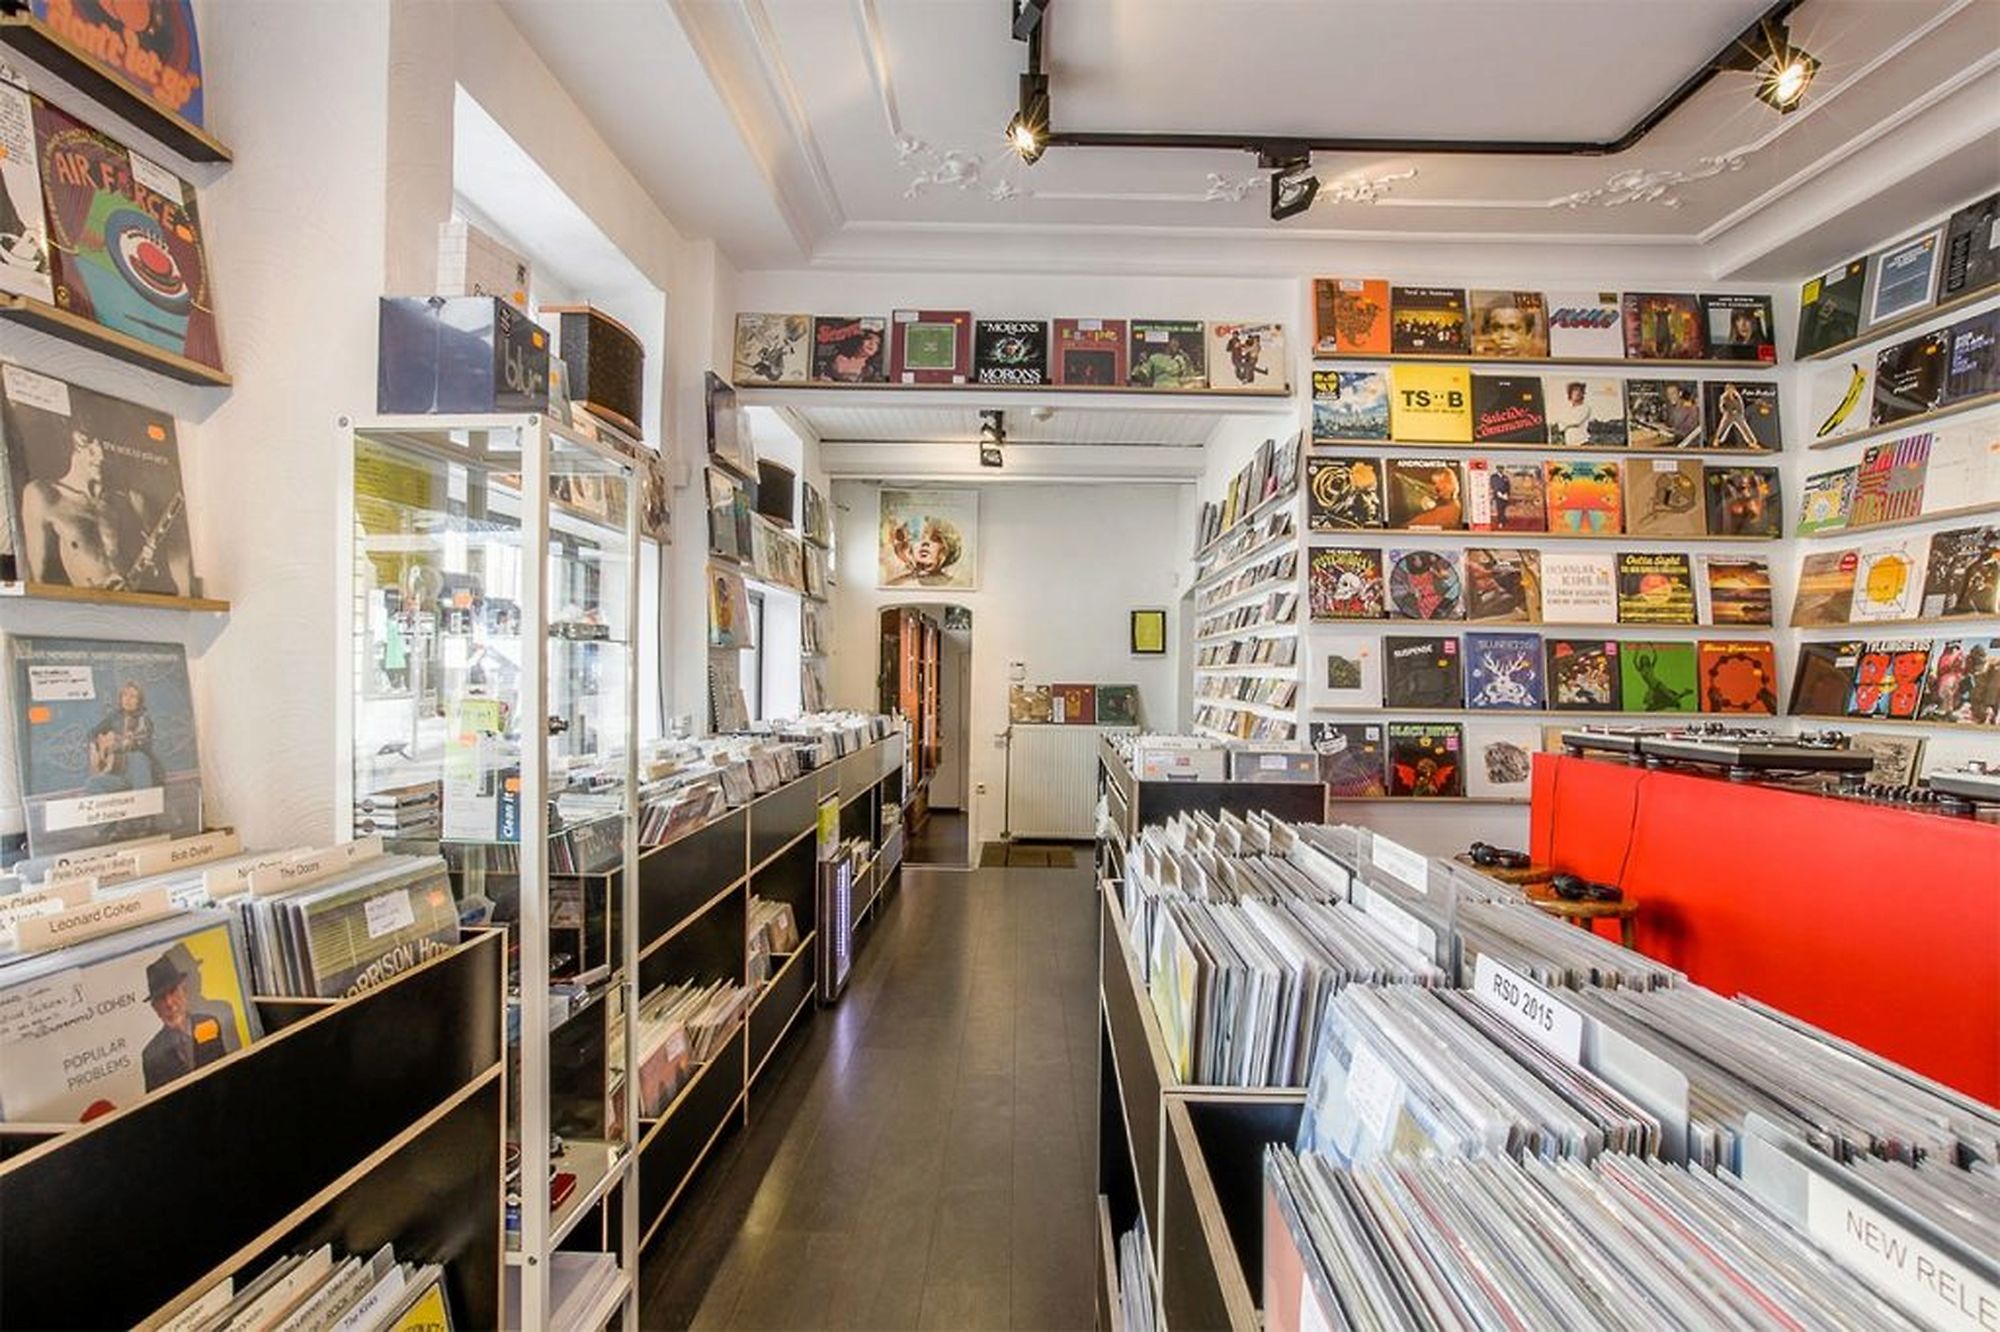 About Music Mania Records Ghent